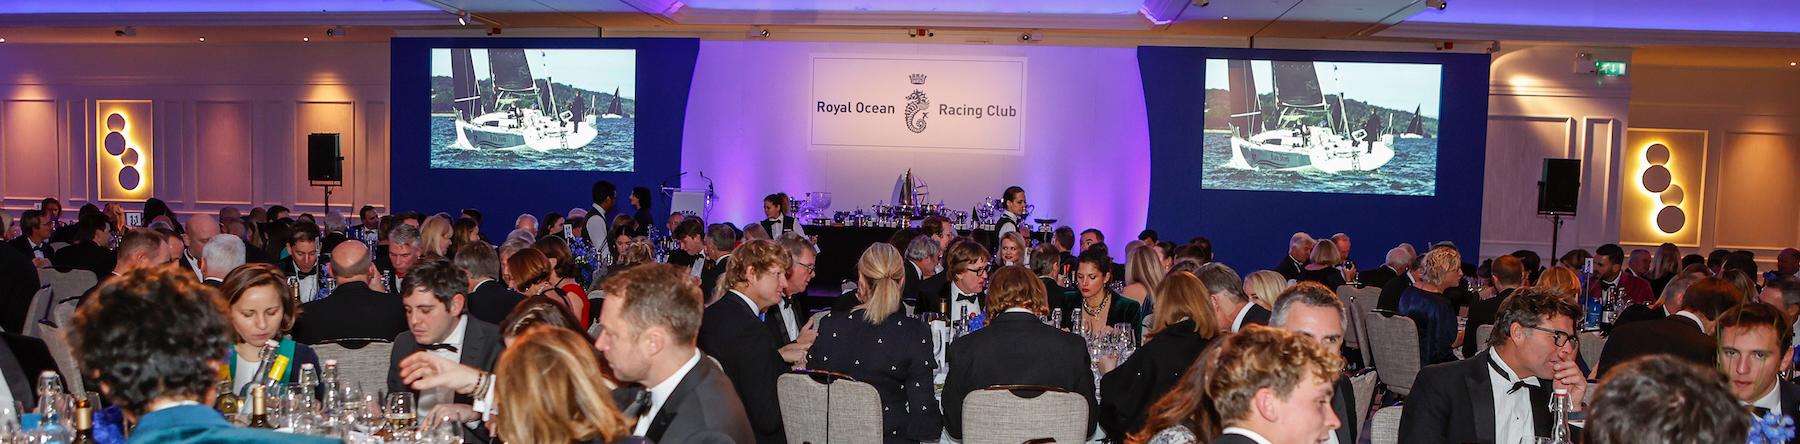 Celebrations at the RORC | Annual Dinner and Prize Giving